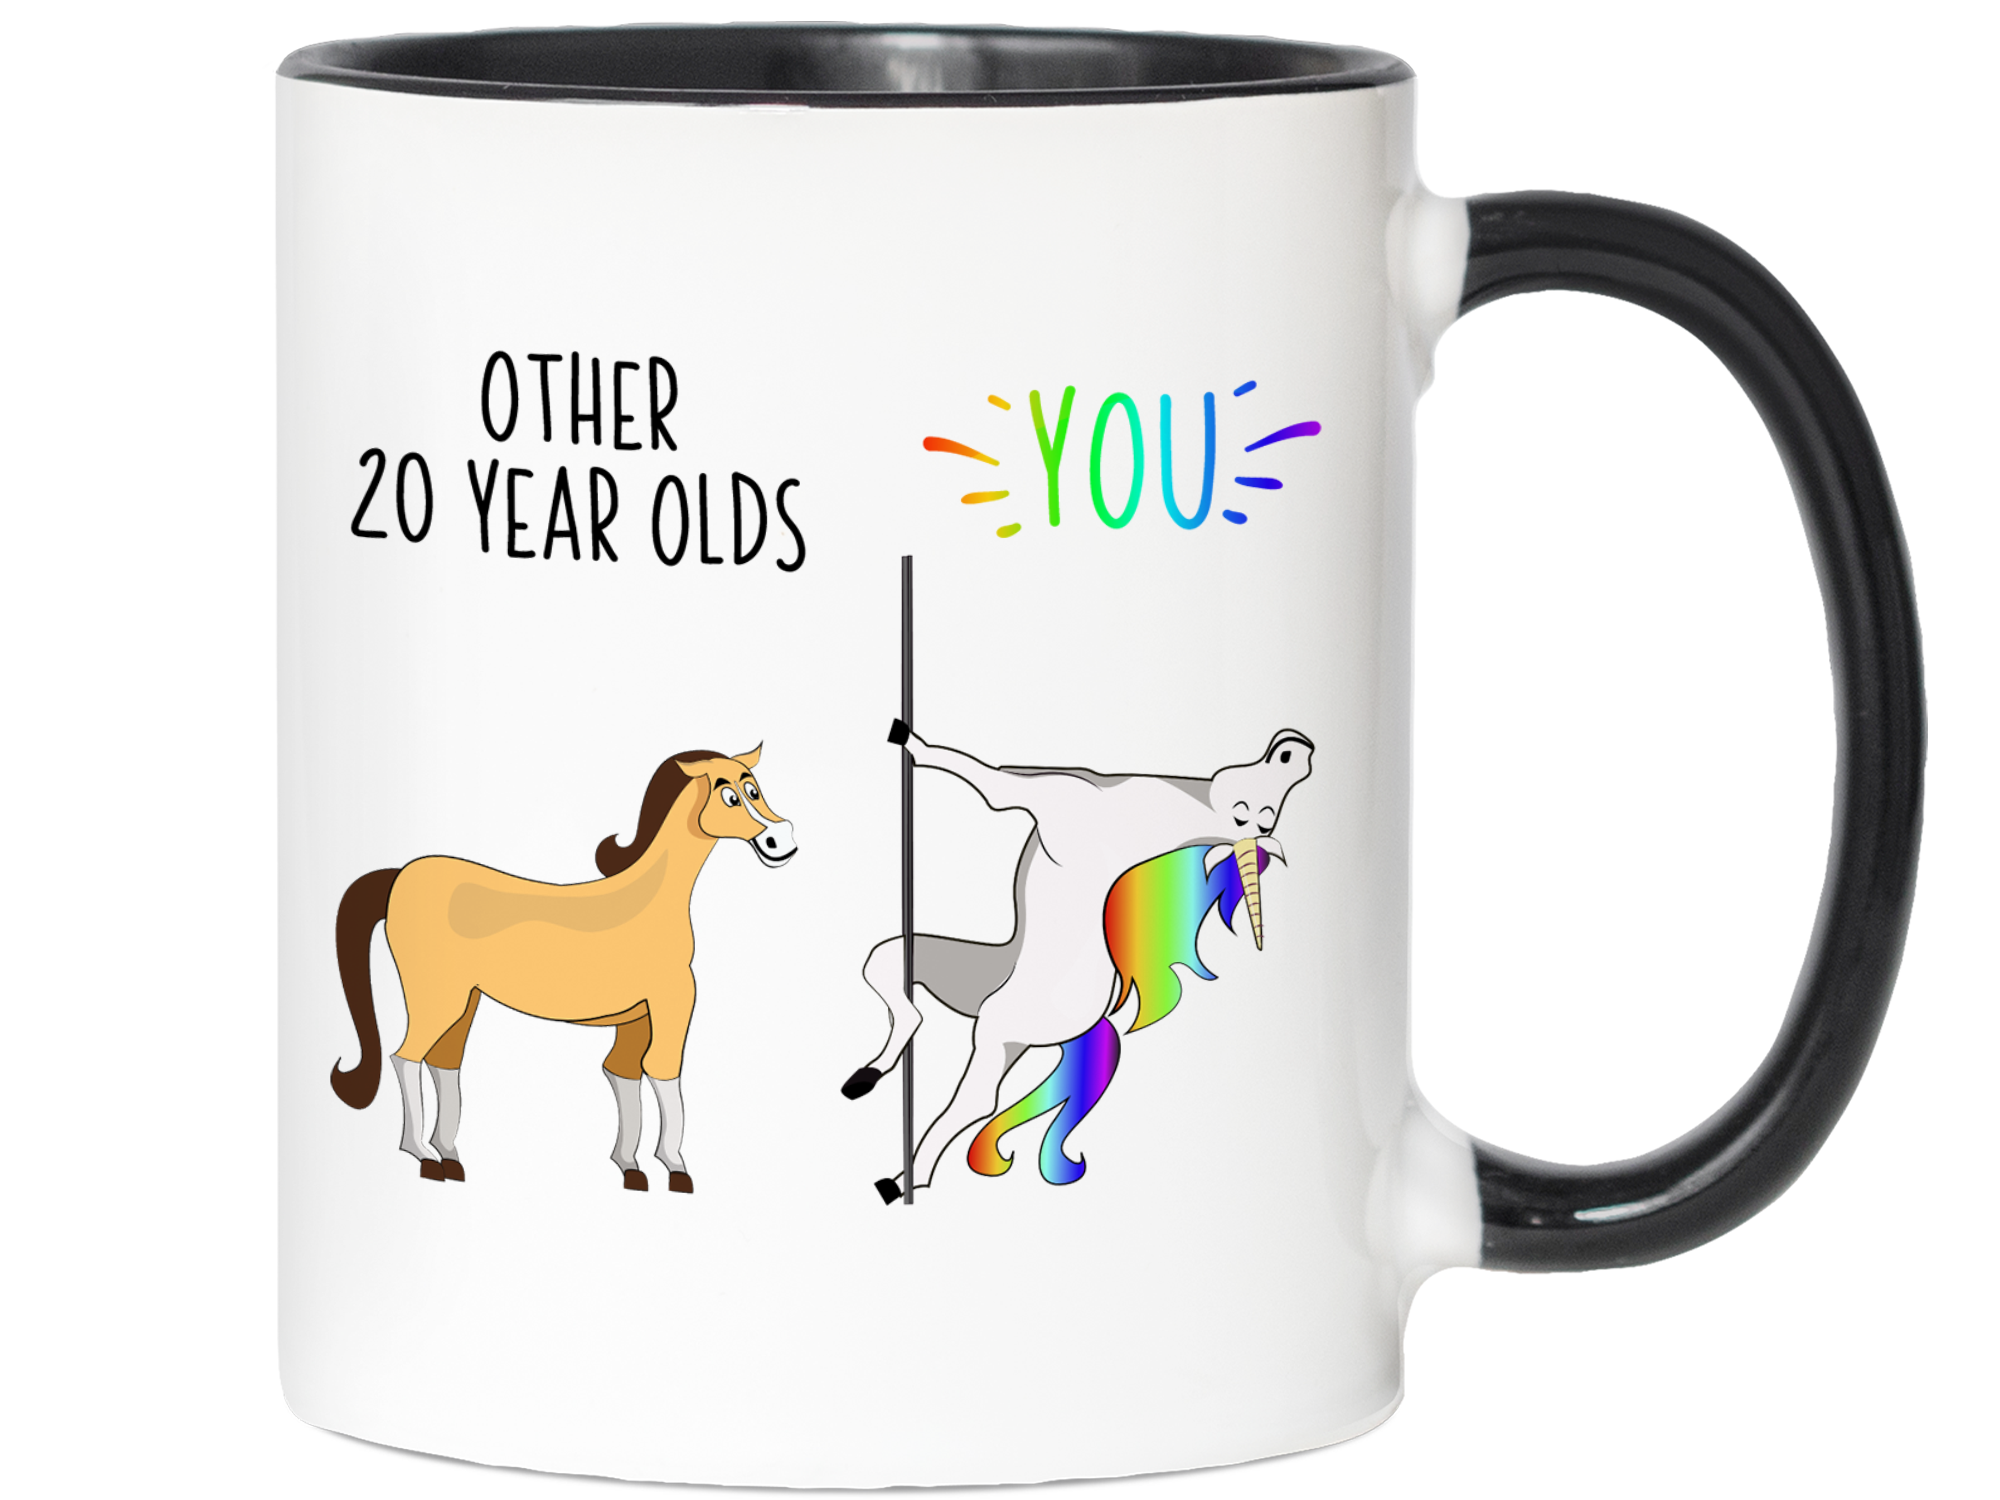 Buy All Your Design Printed Cup for Birthday, Personalized Ceramic Mug  Birthday Gift for Friends, Beloved (Design-9) Online at Low Prices in India  - Amazon.in